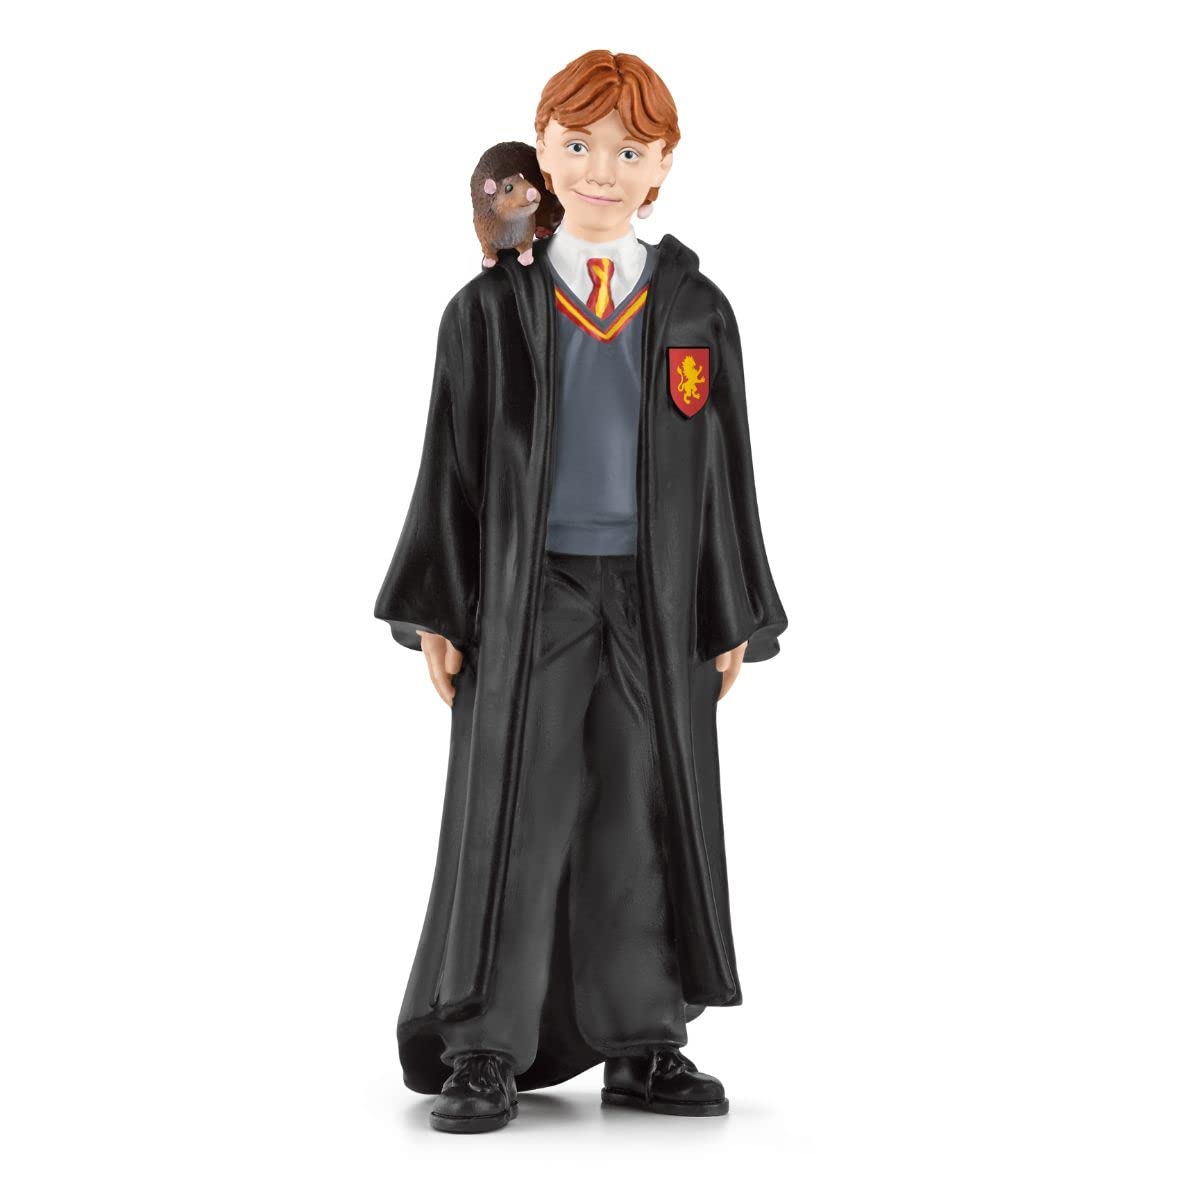 Schleich Wizarding World™ of Harry Potter™ 2-Piece Set with Ron Weasley™ & Scabbers™ Collectible Figurines for Kids Ages 6+